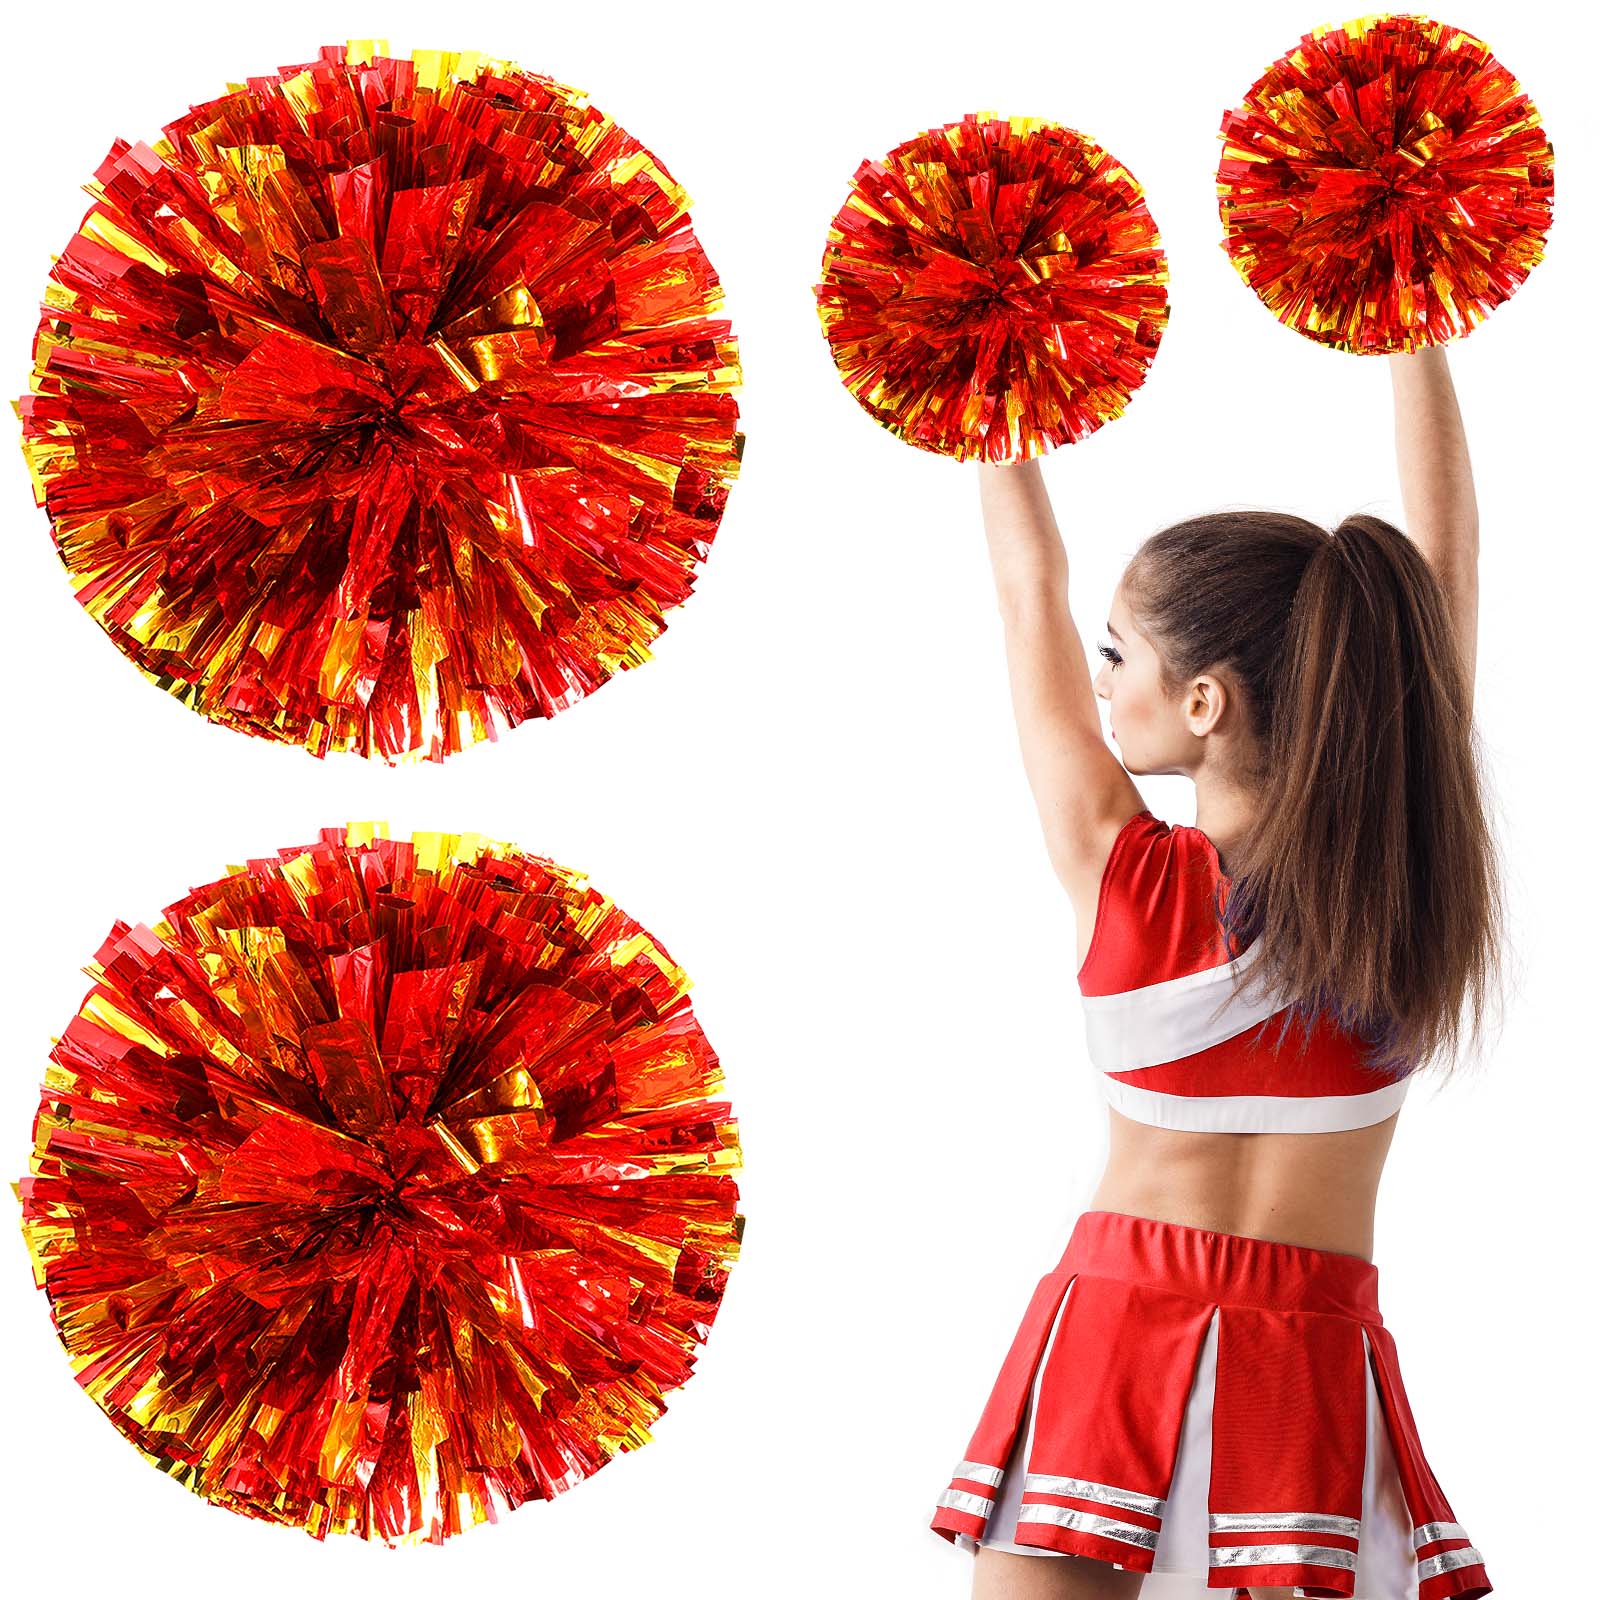 1set 4pcs Red Pom Poms Suitable For Dance Party, Football, Basketball,  Sports Party, Cheerleading Props